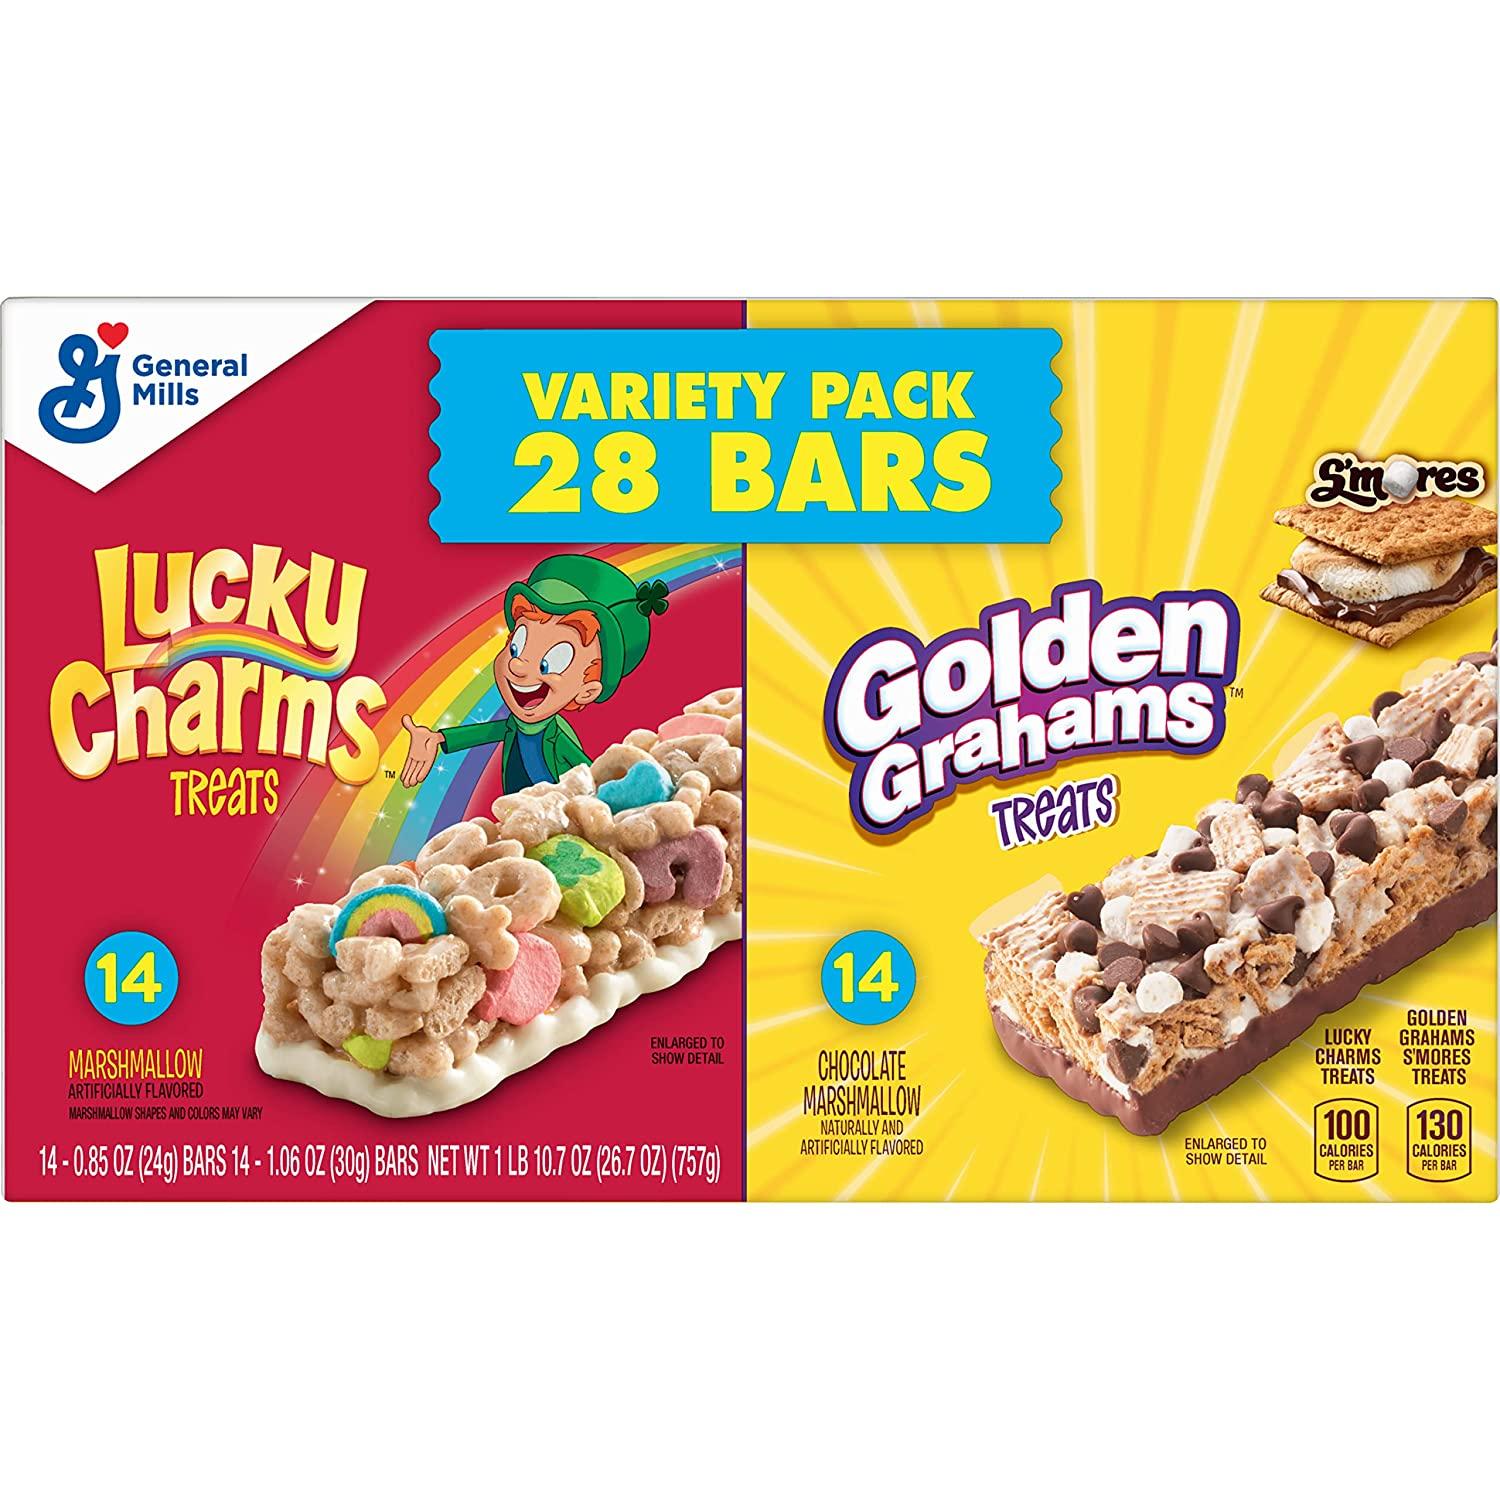 Lucky Charms 2 Family Size Boxes Honey Clovers and Chocolate